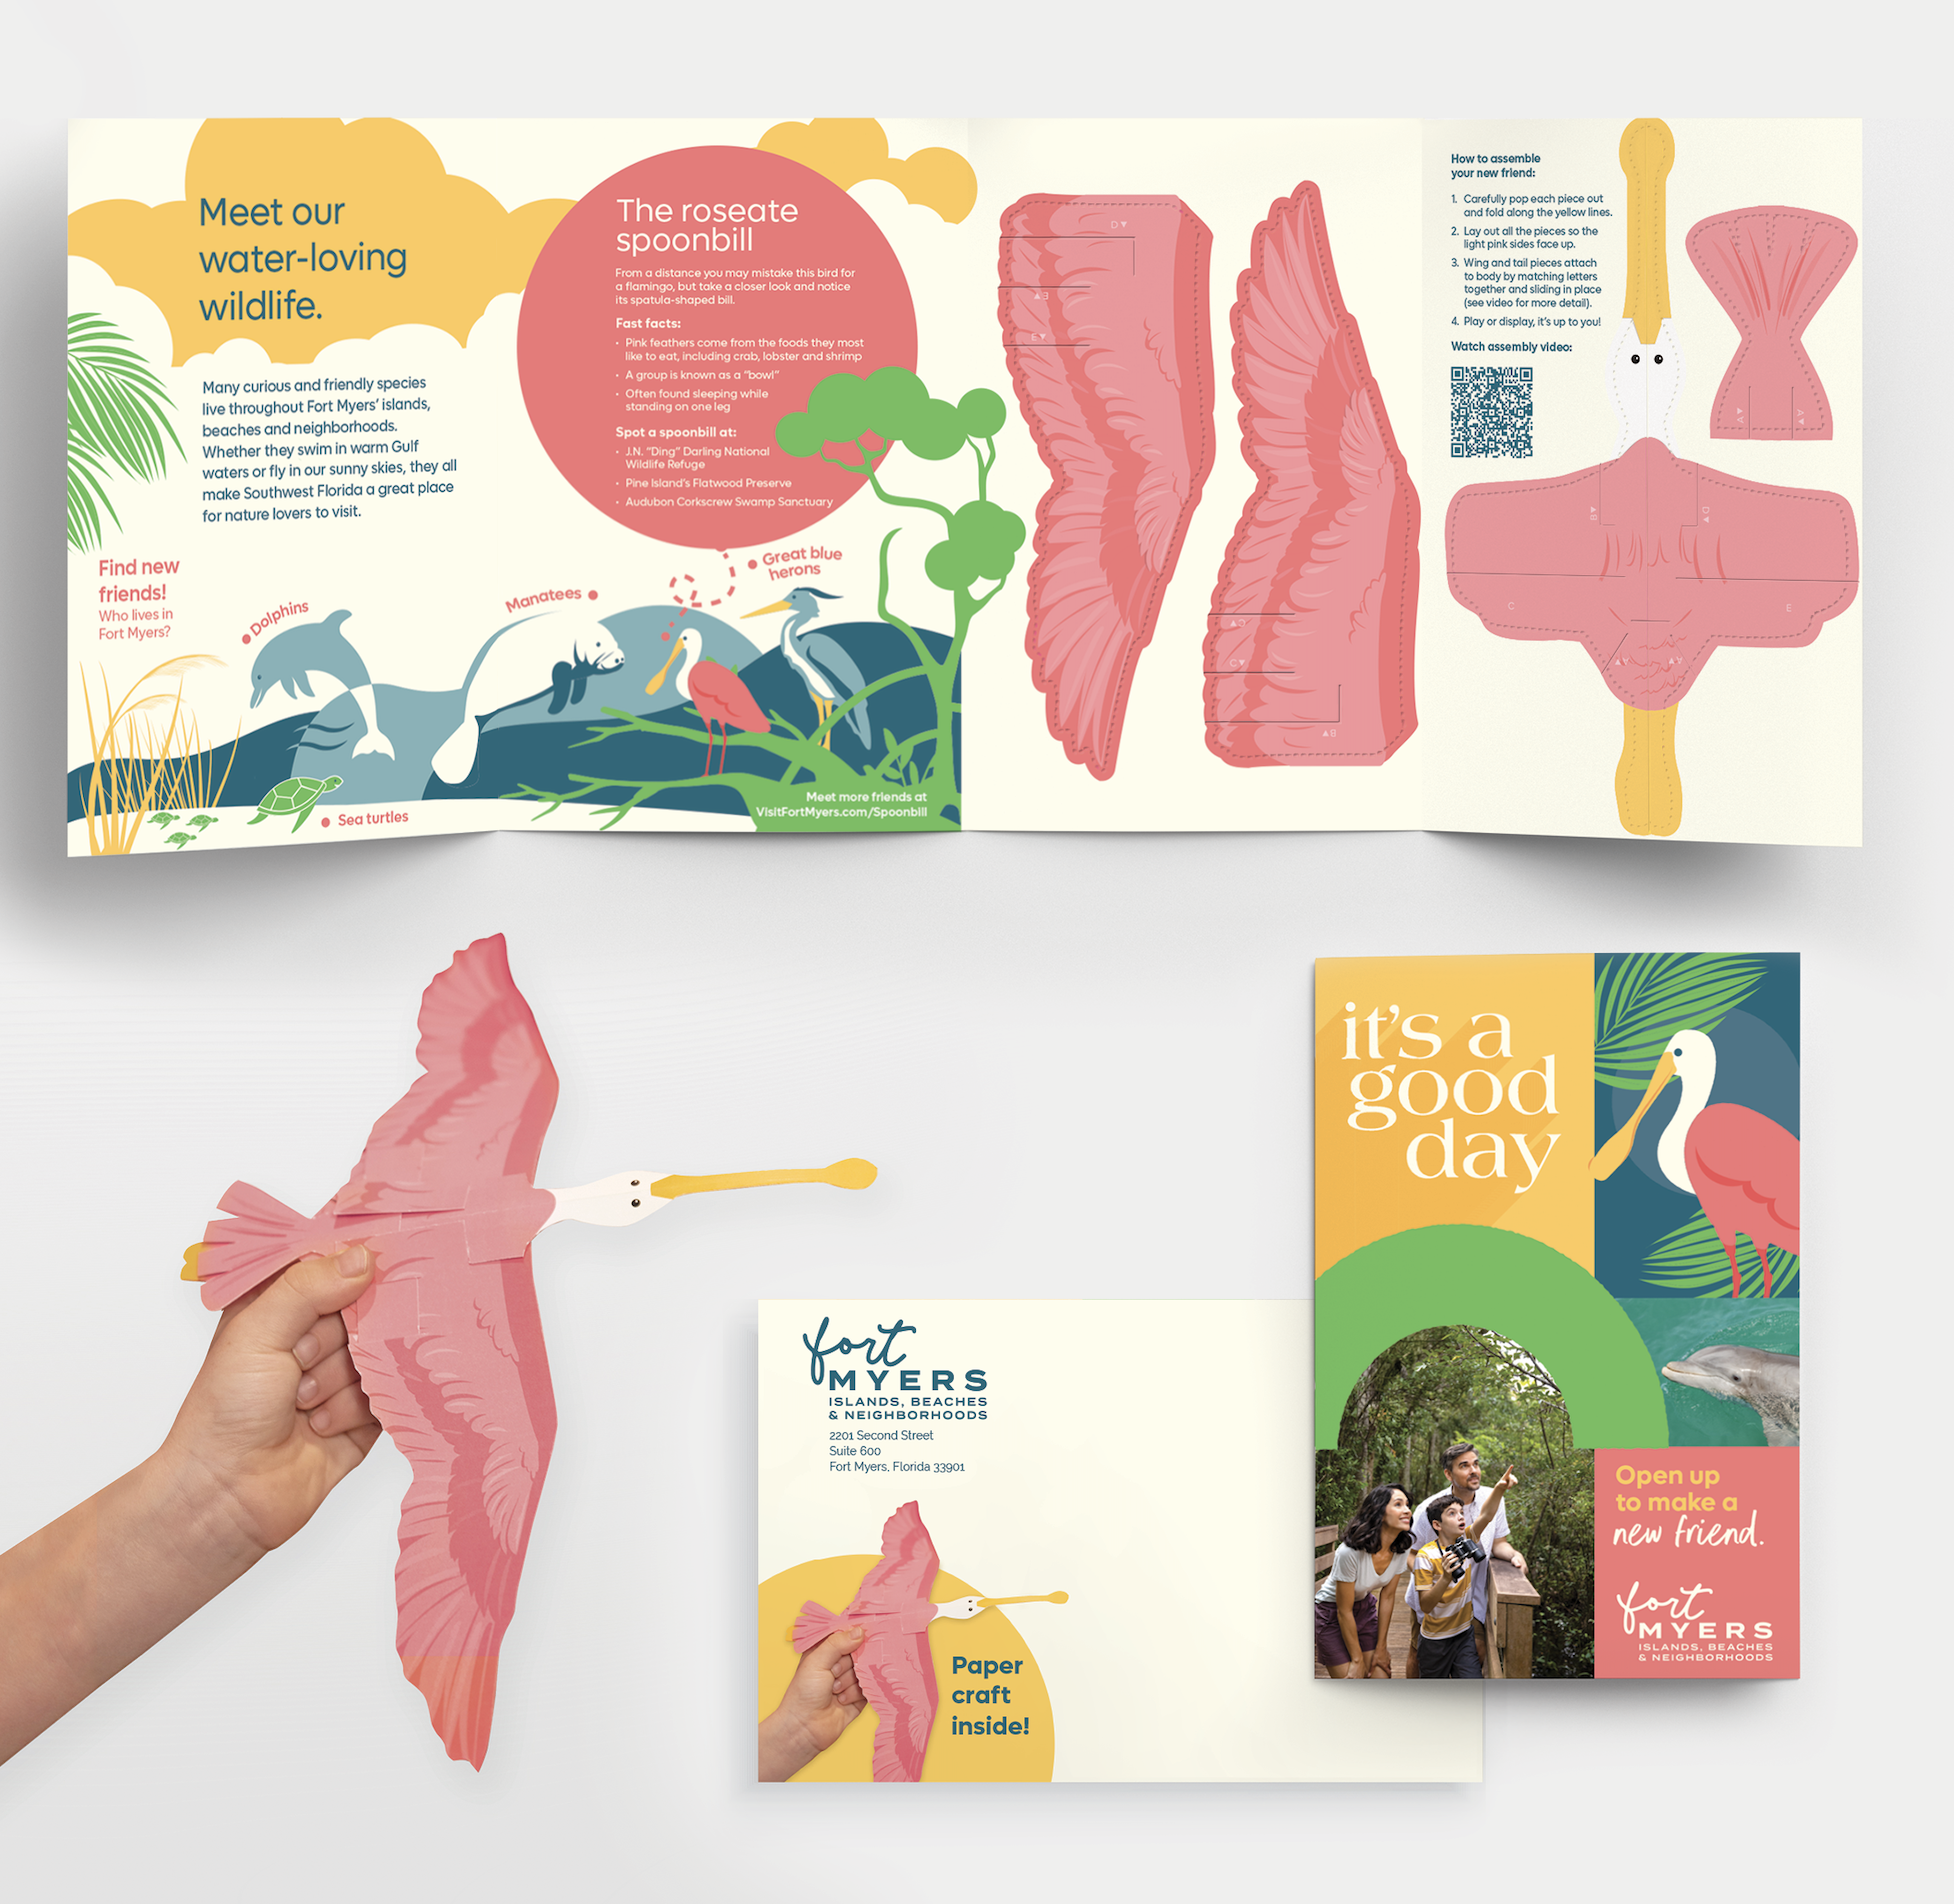 A pdf featuring the creative of the spoonbill direct mailer with all pieces and cutouts shown